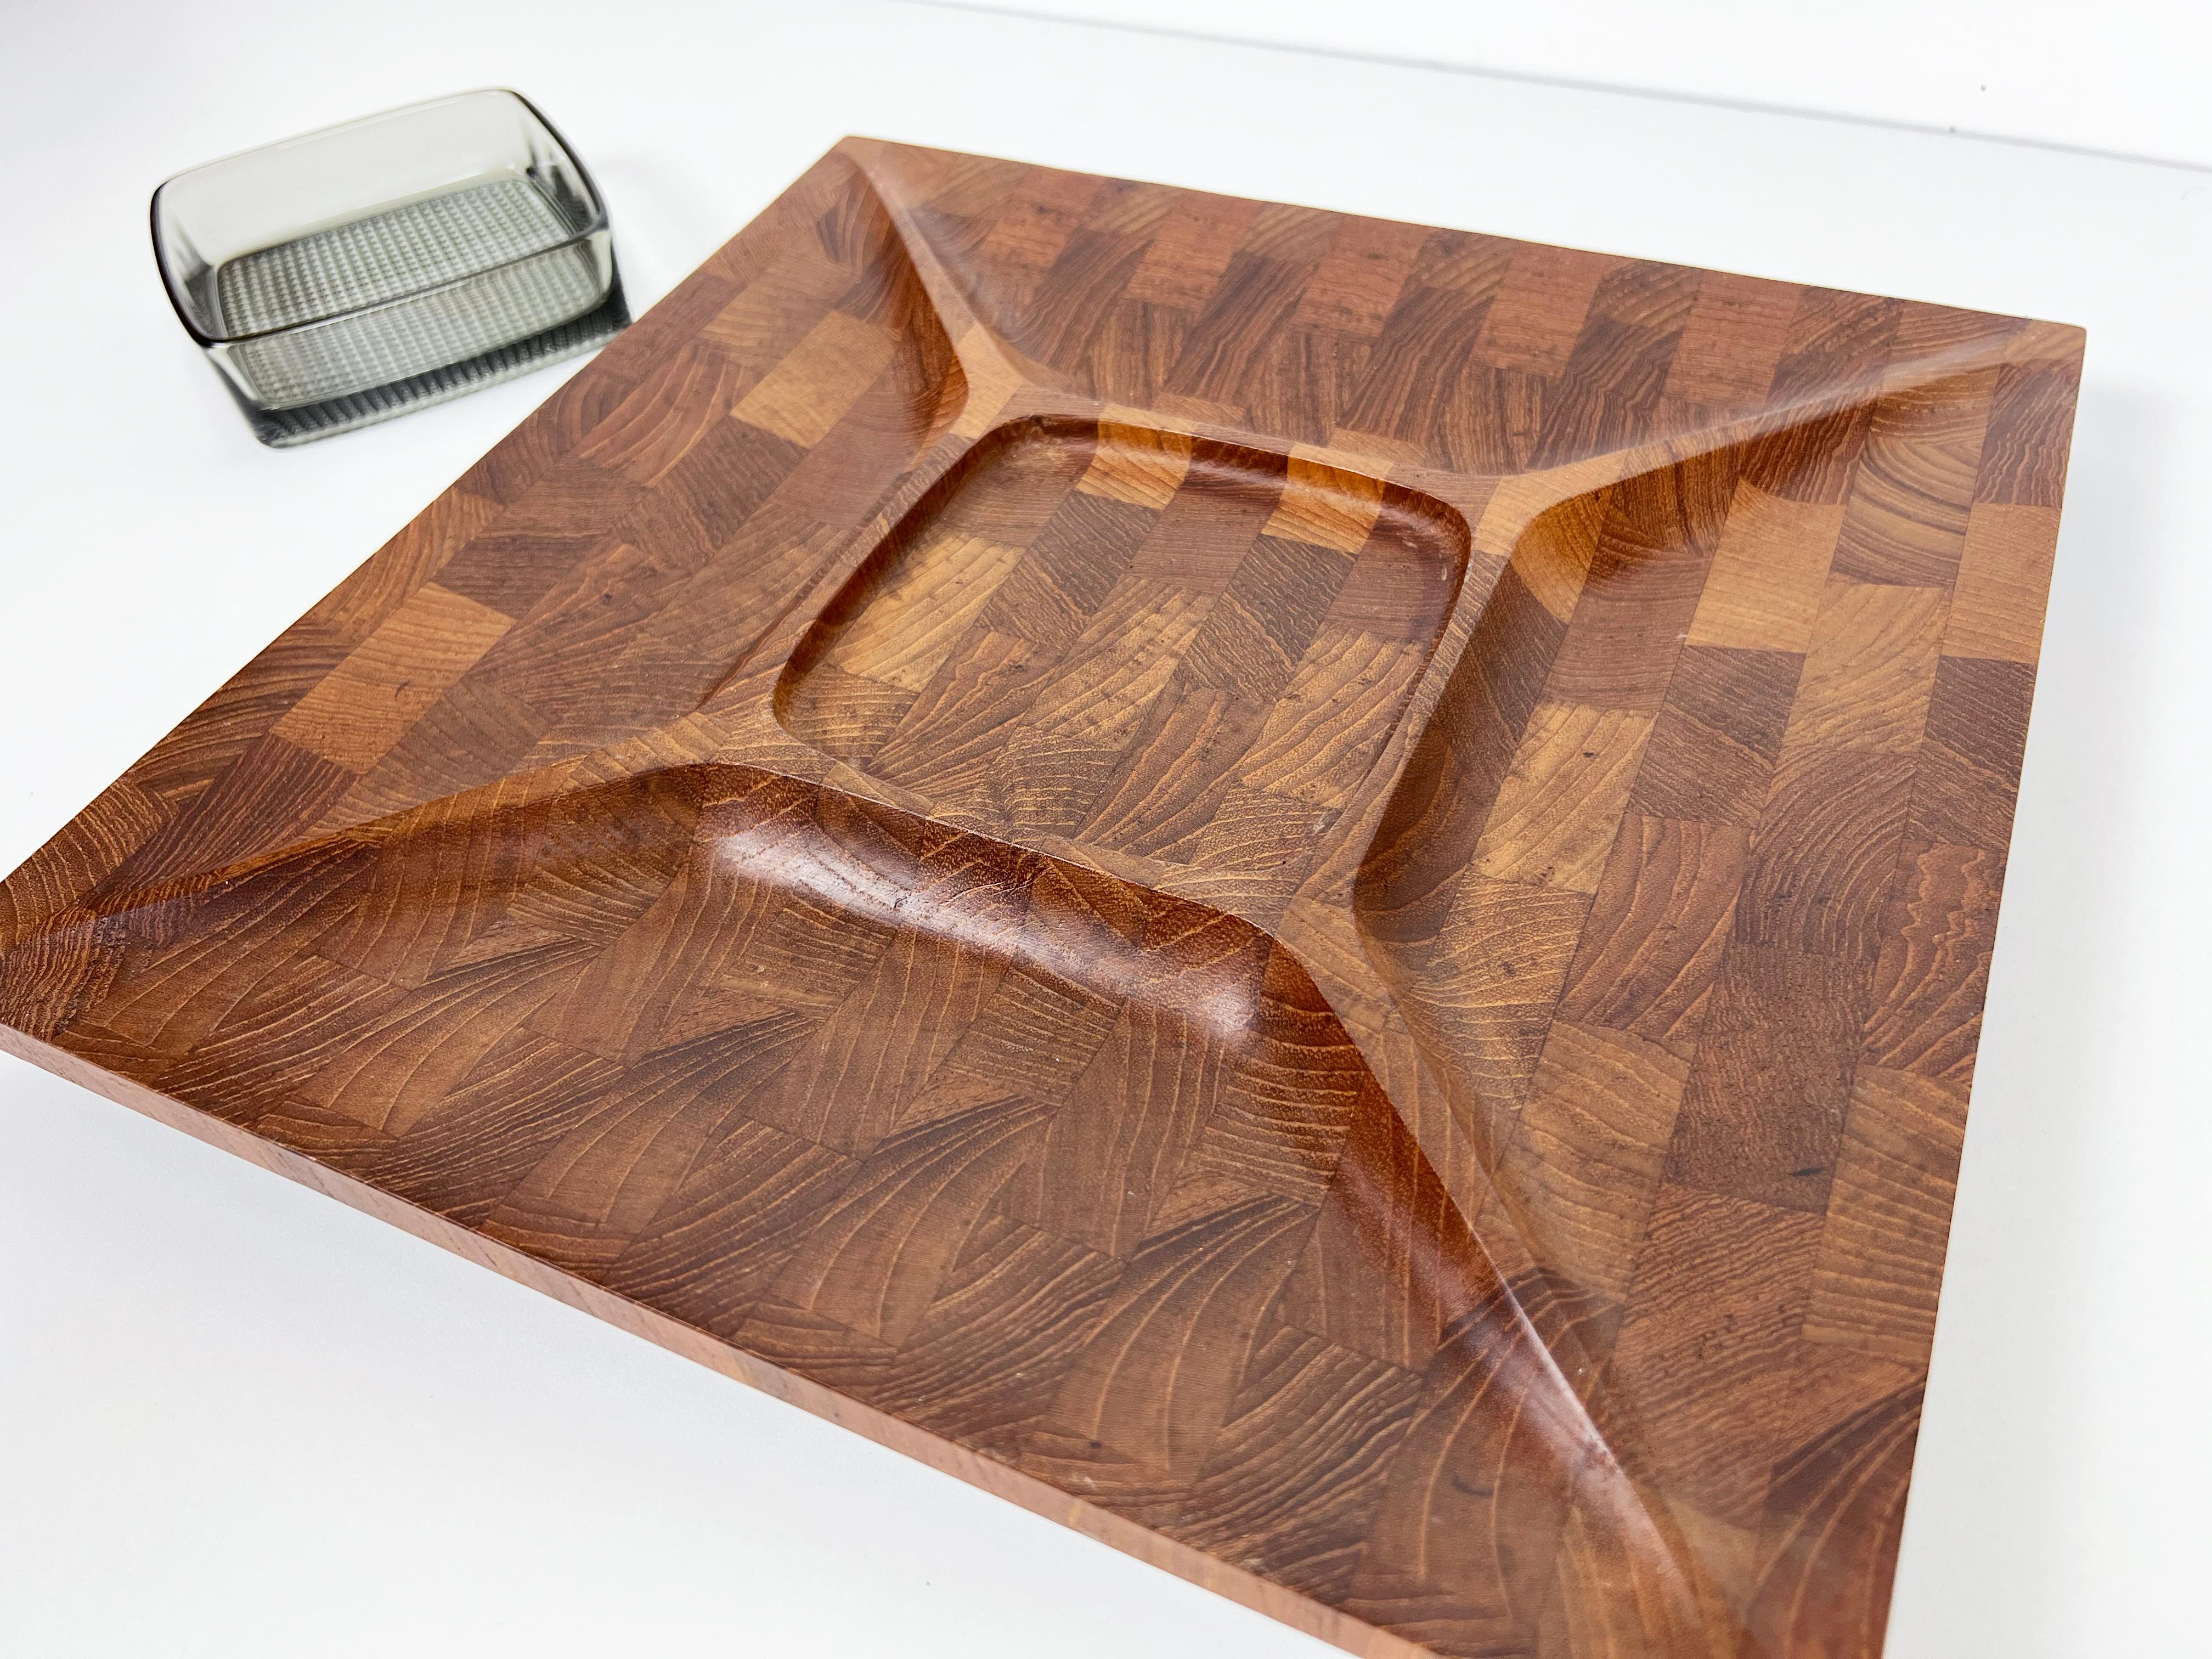 Vintage Divided Teak Serving Tray with Glass Dish by Digsmed In Good Condition For Sale In Fort Lauderdale, FL